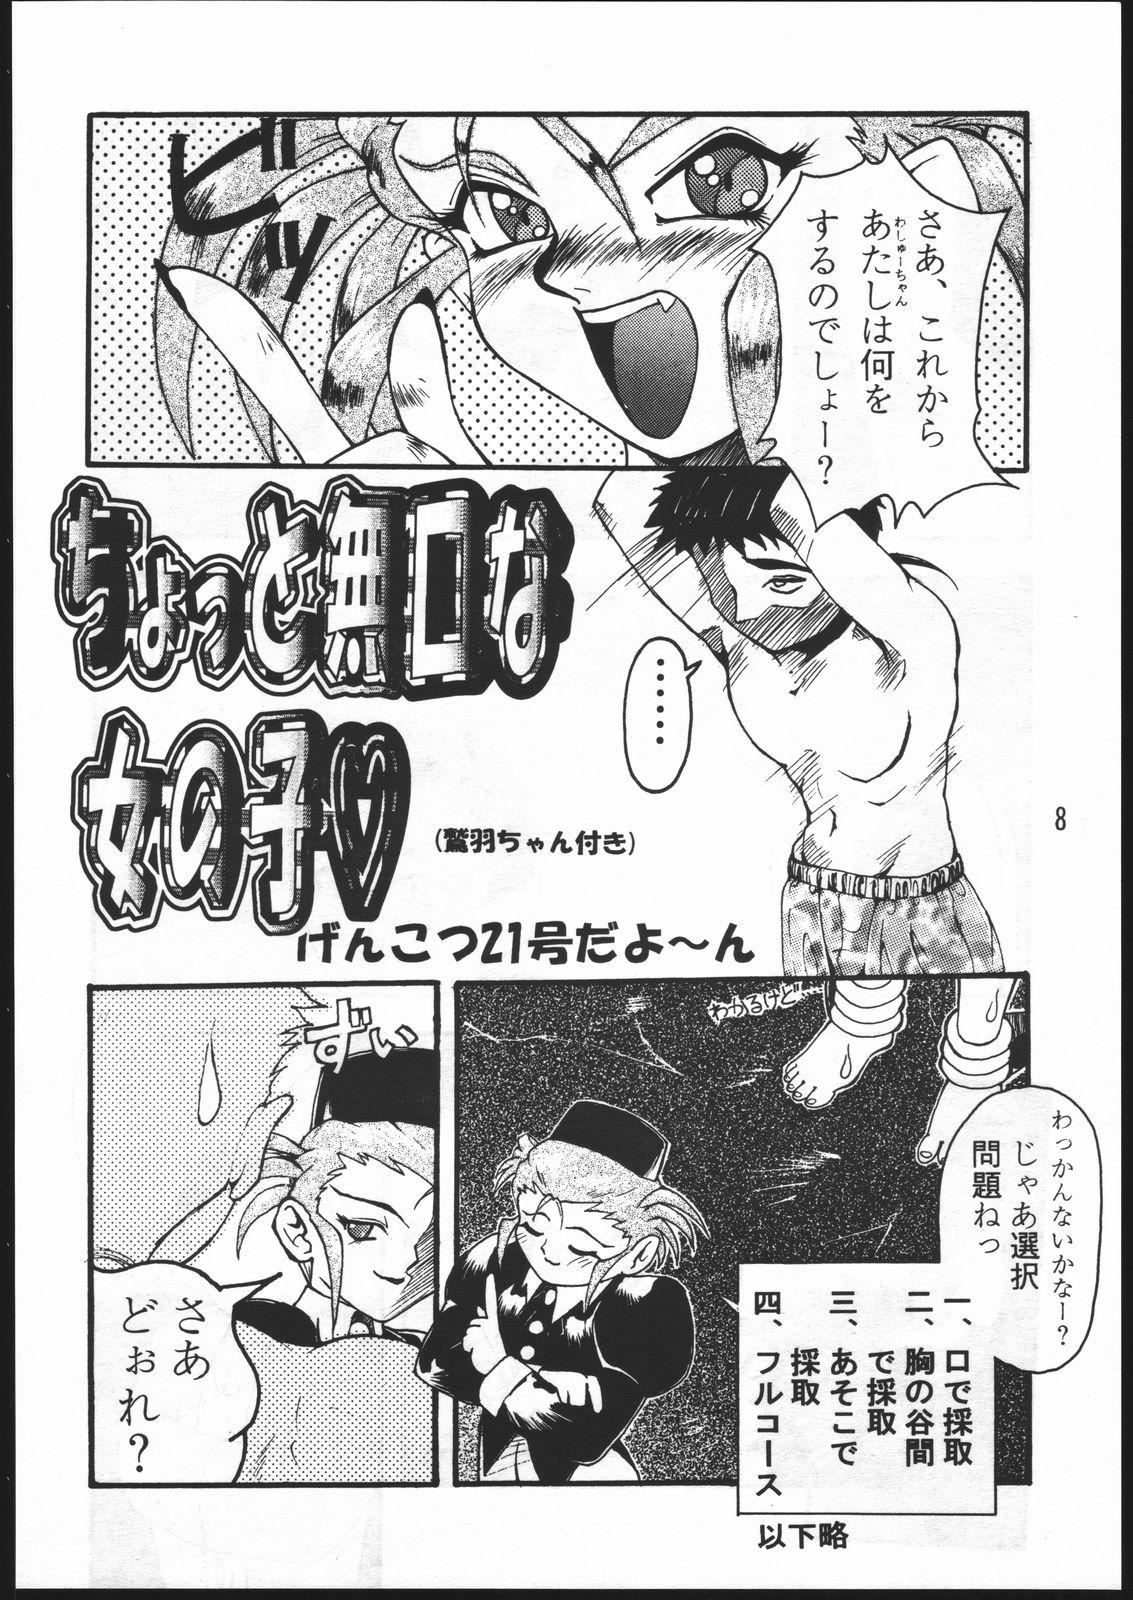 Double CD SONG BOOK - Tenchi muyo Dirty - Page 7